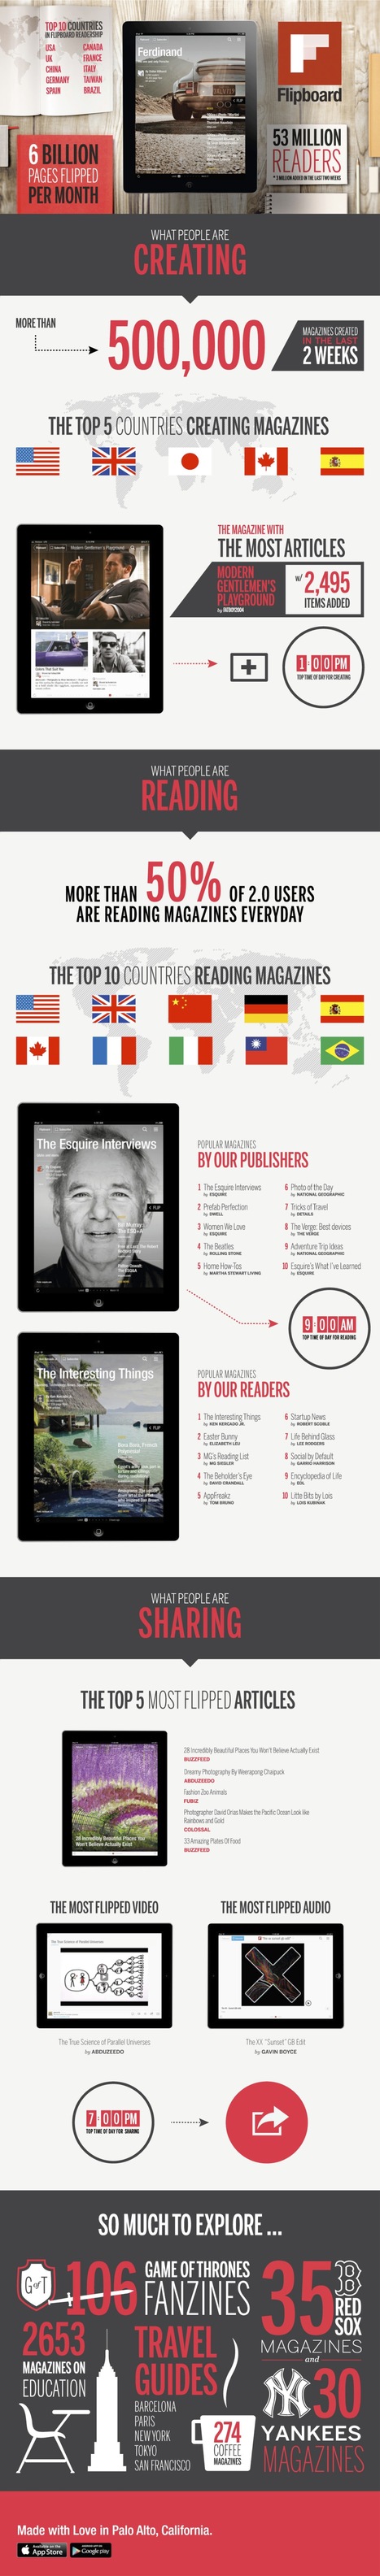 The State of Flipboard and Rise of Mobile Curation [INFOGRAPHIC] | Power of Content Curation | Scoop.it